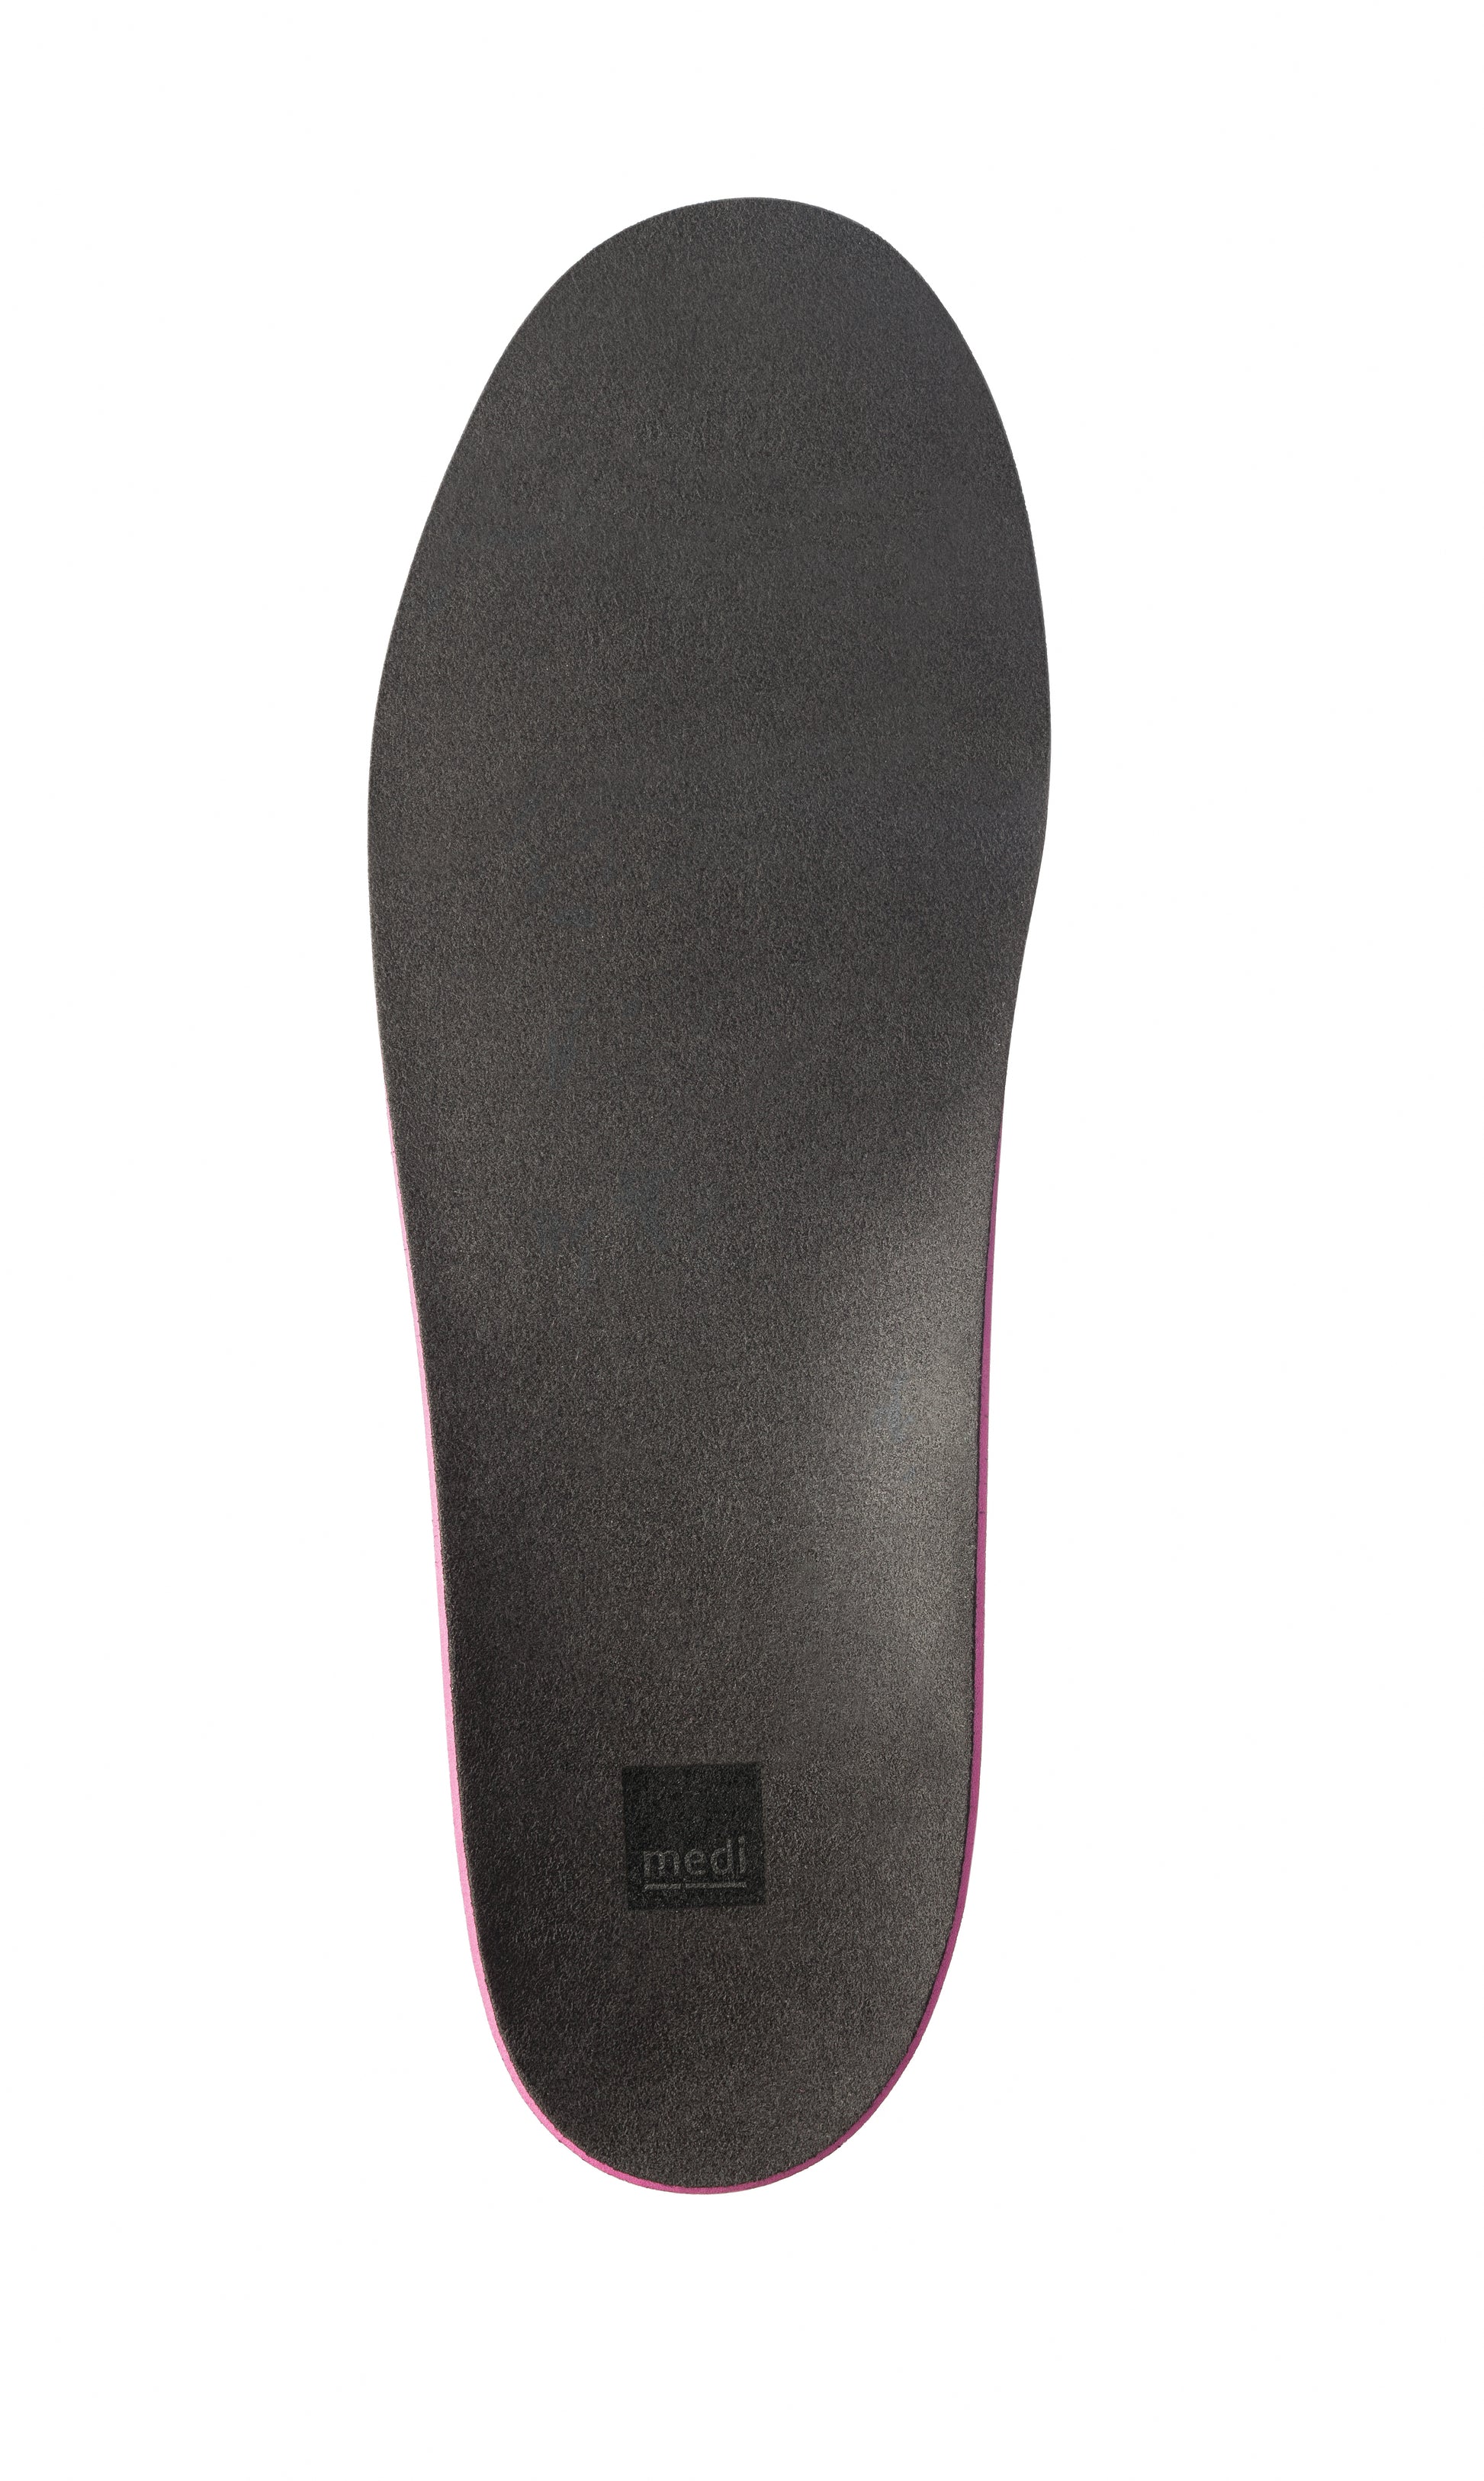 medi protect Control Insoles, Top View